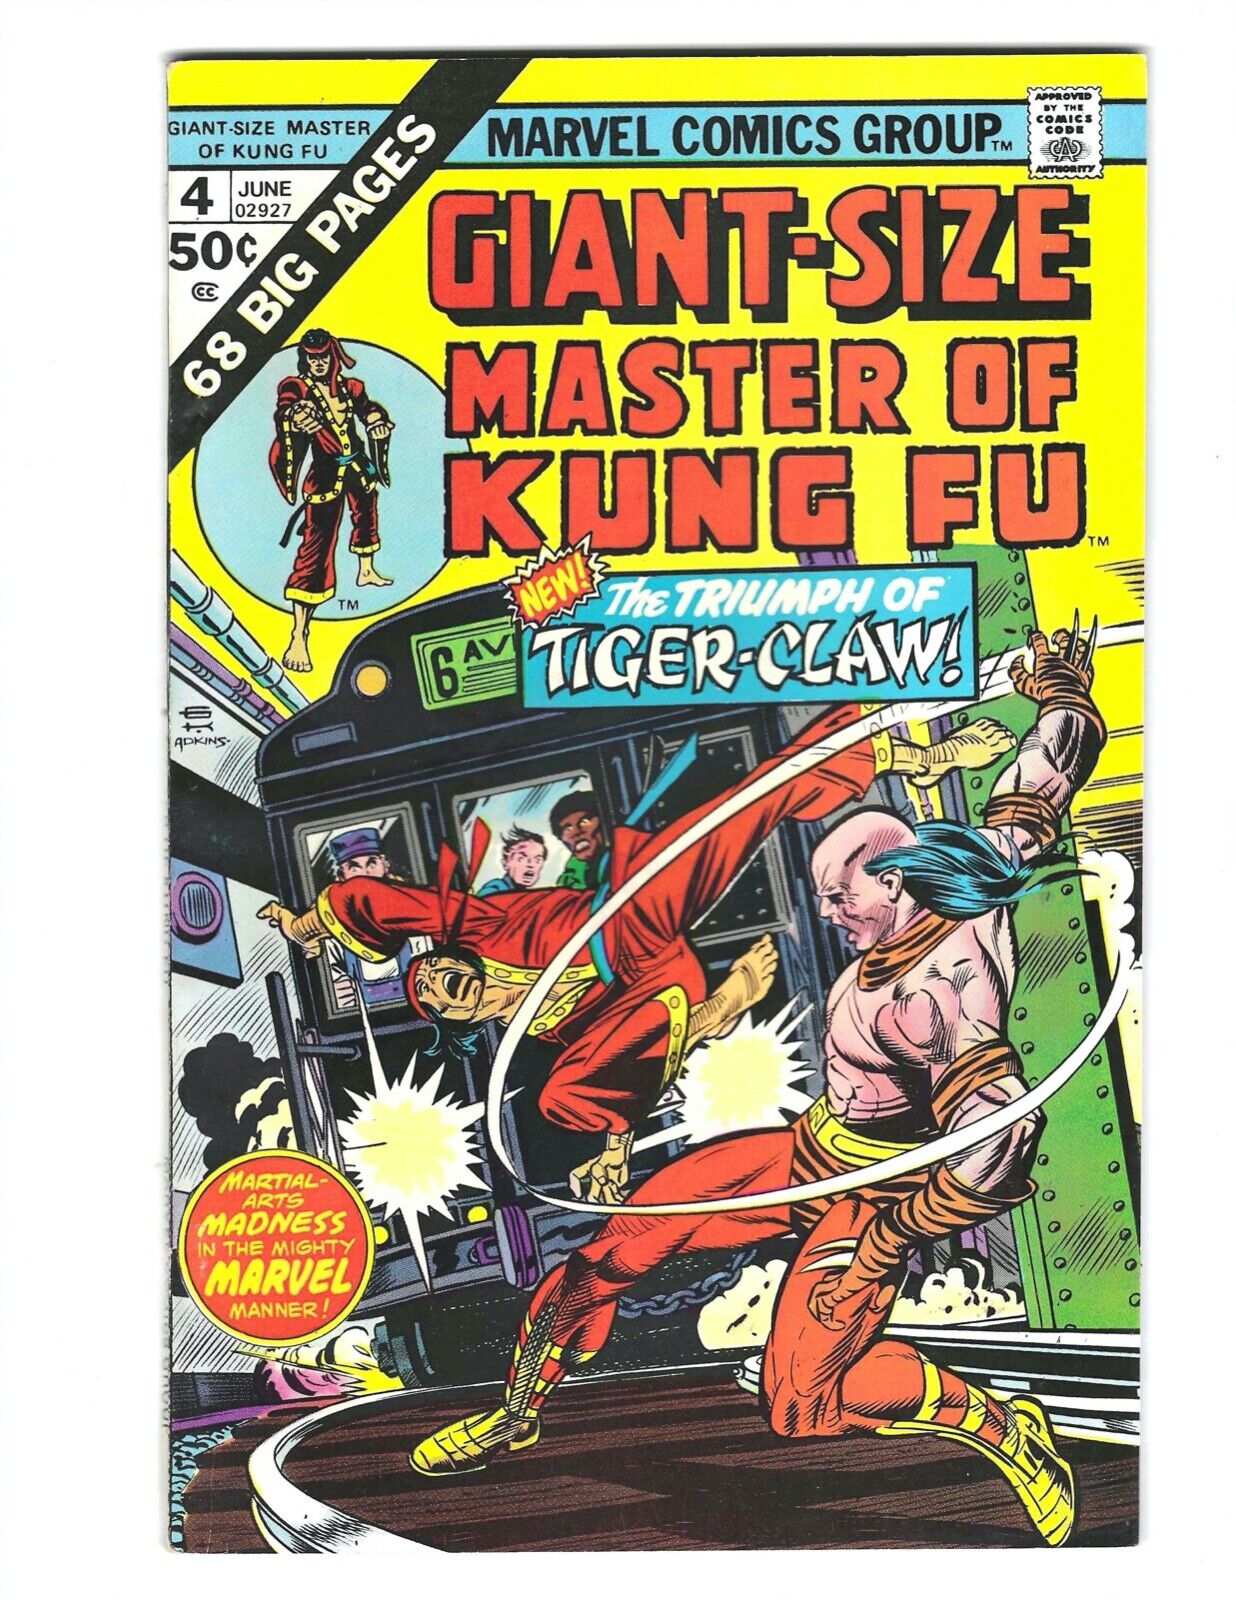 Giant-Size Master of Kung-Fu #4 1975 VF/NM or better Beauty Shang Chi Combine